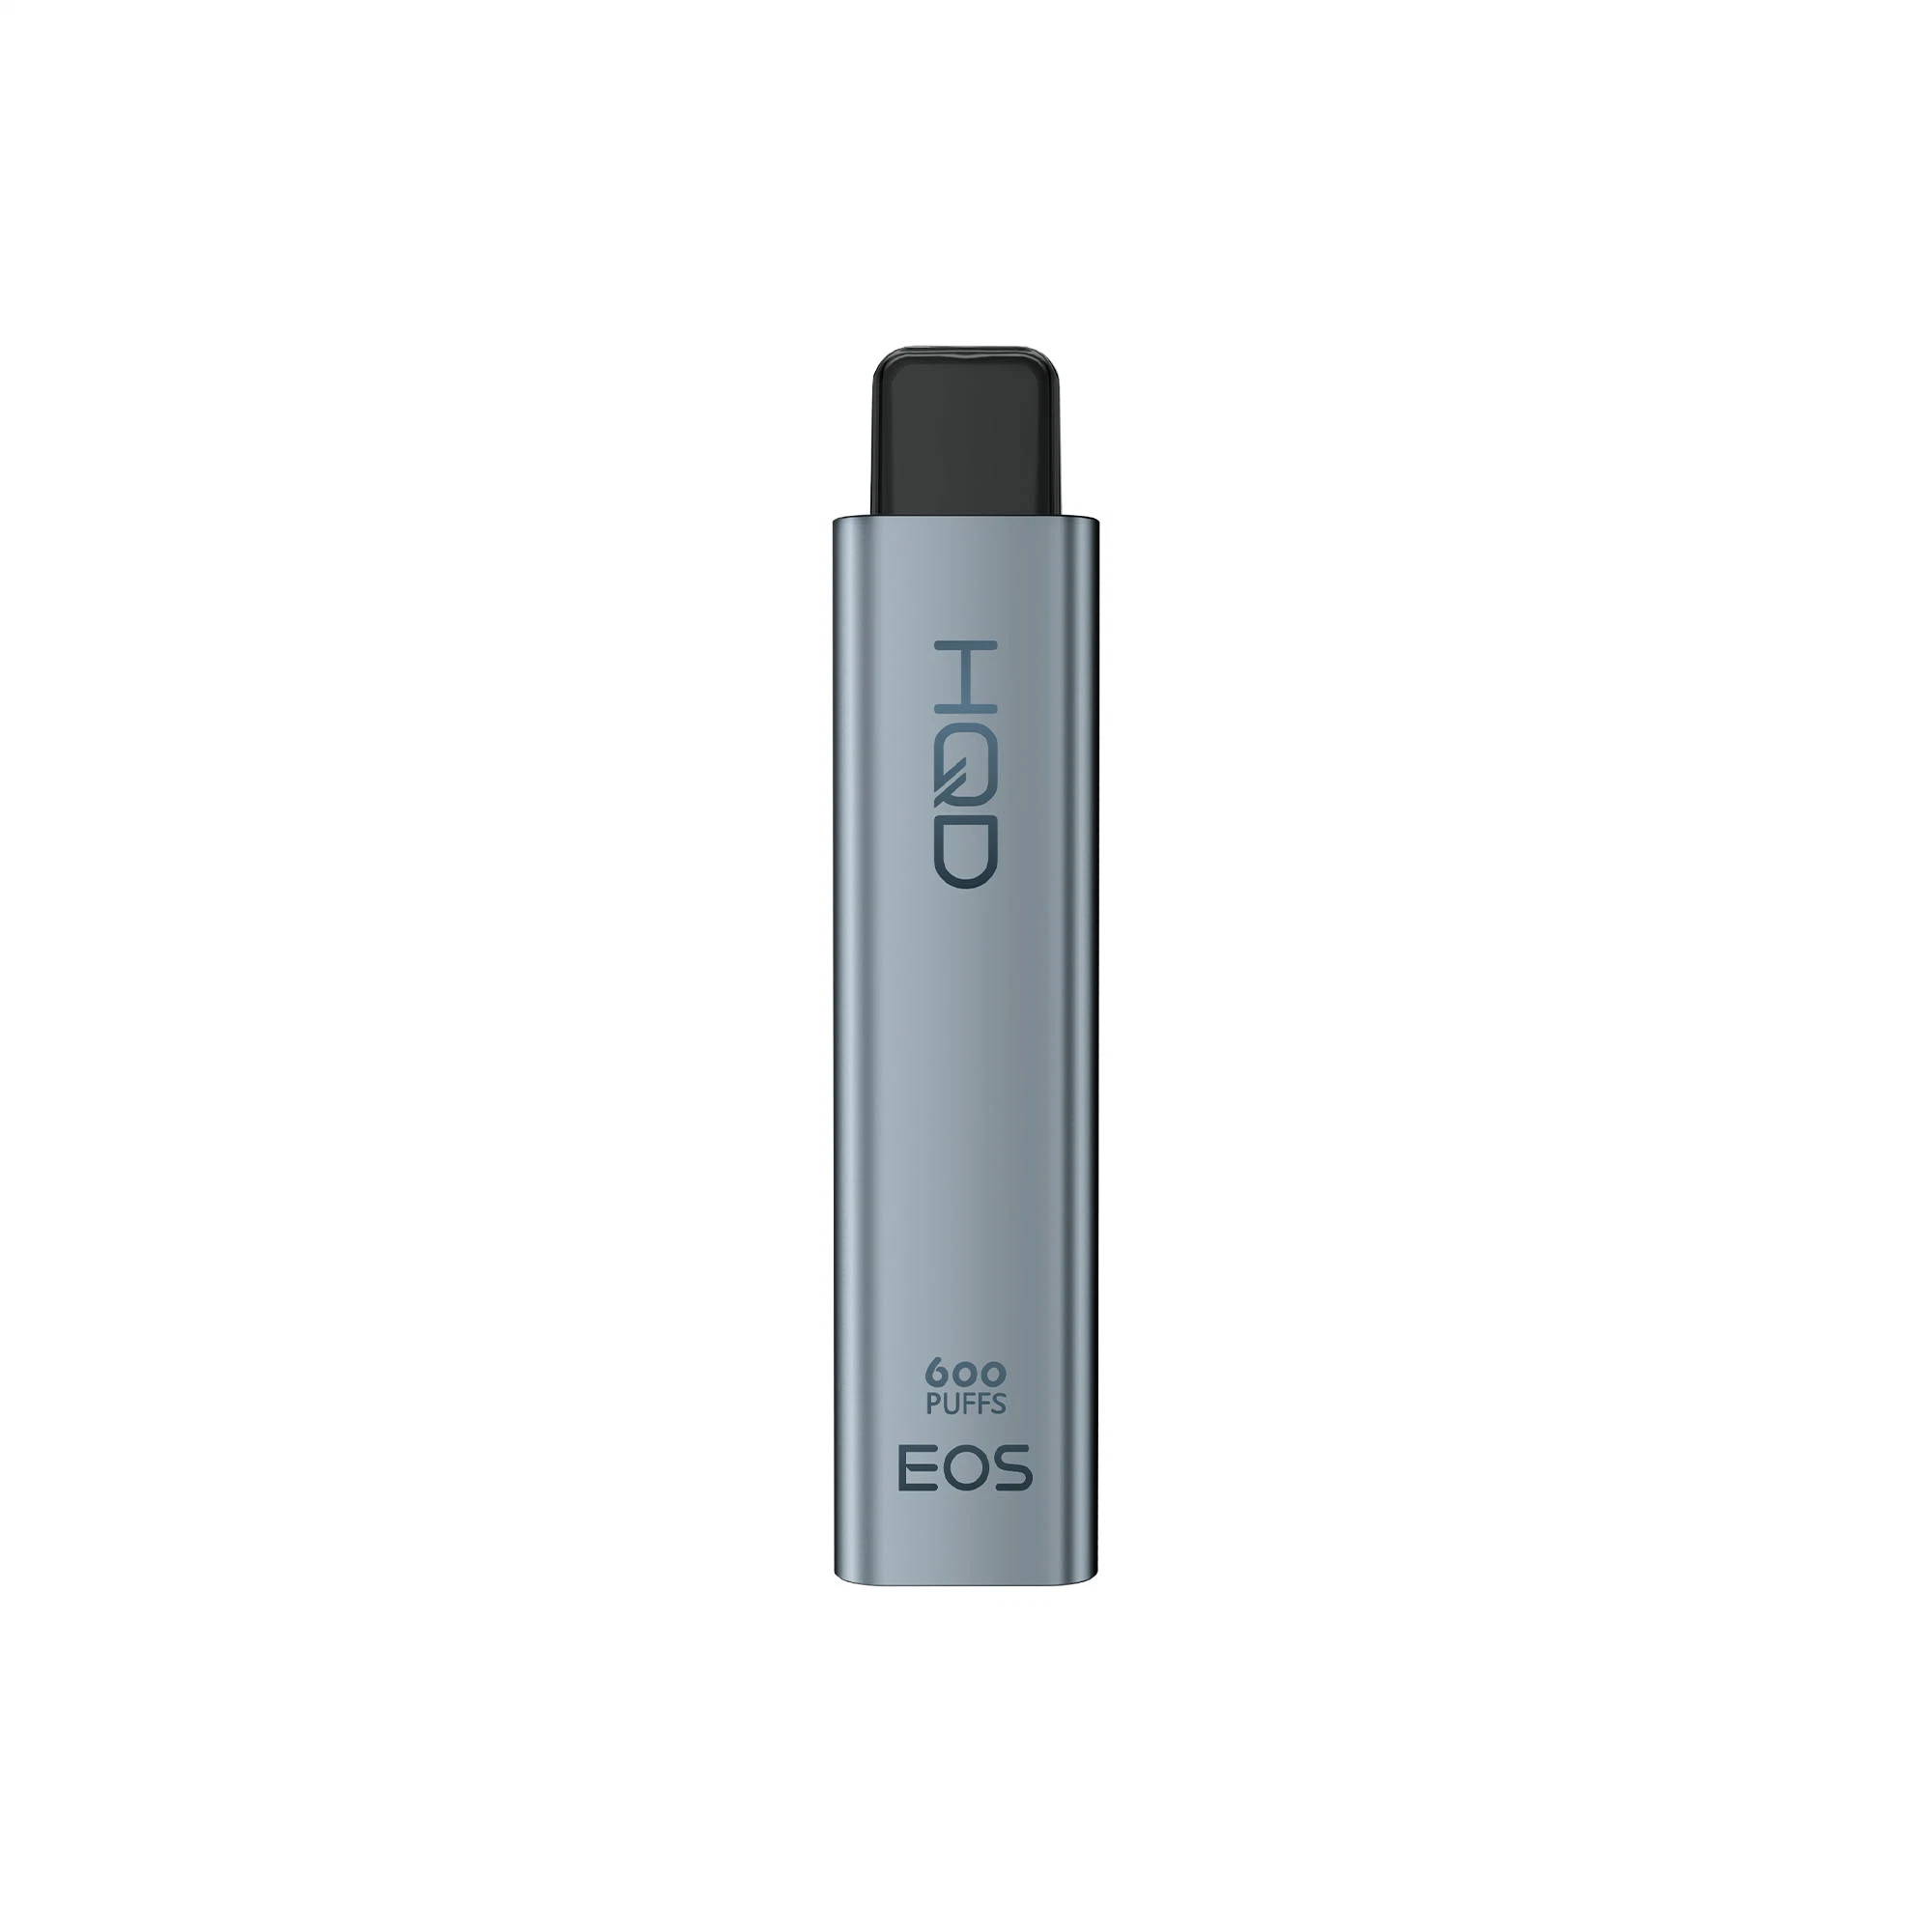 Tpd Hot Selling Disposable Vape Hqd EOS 600 Puffs Germany